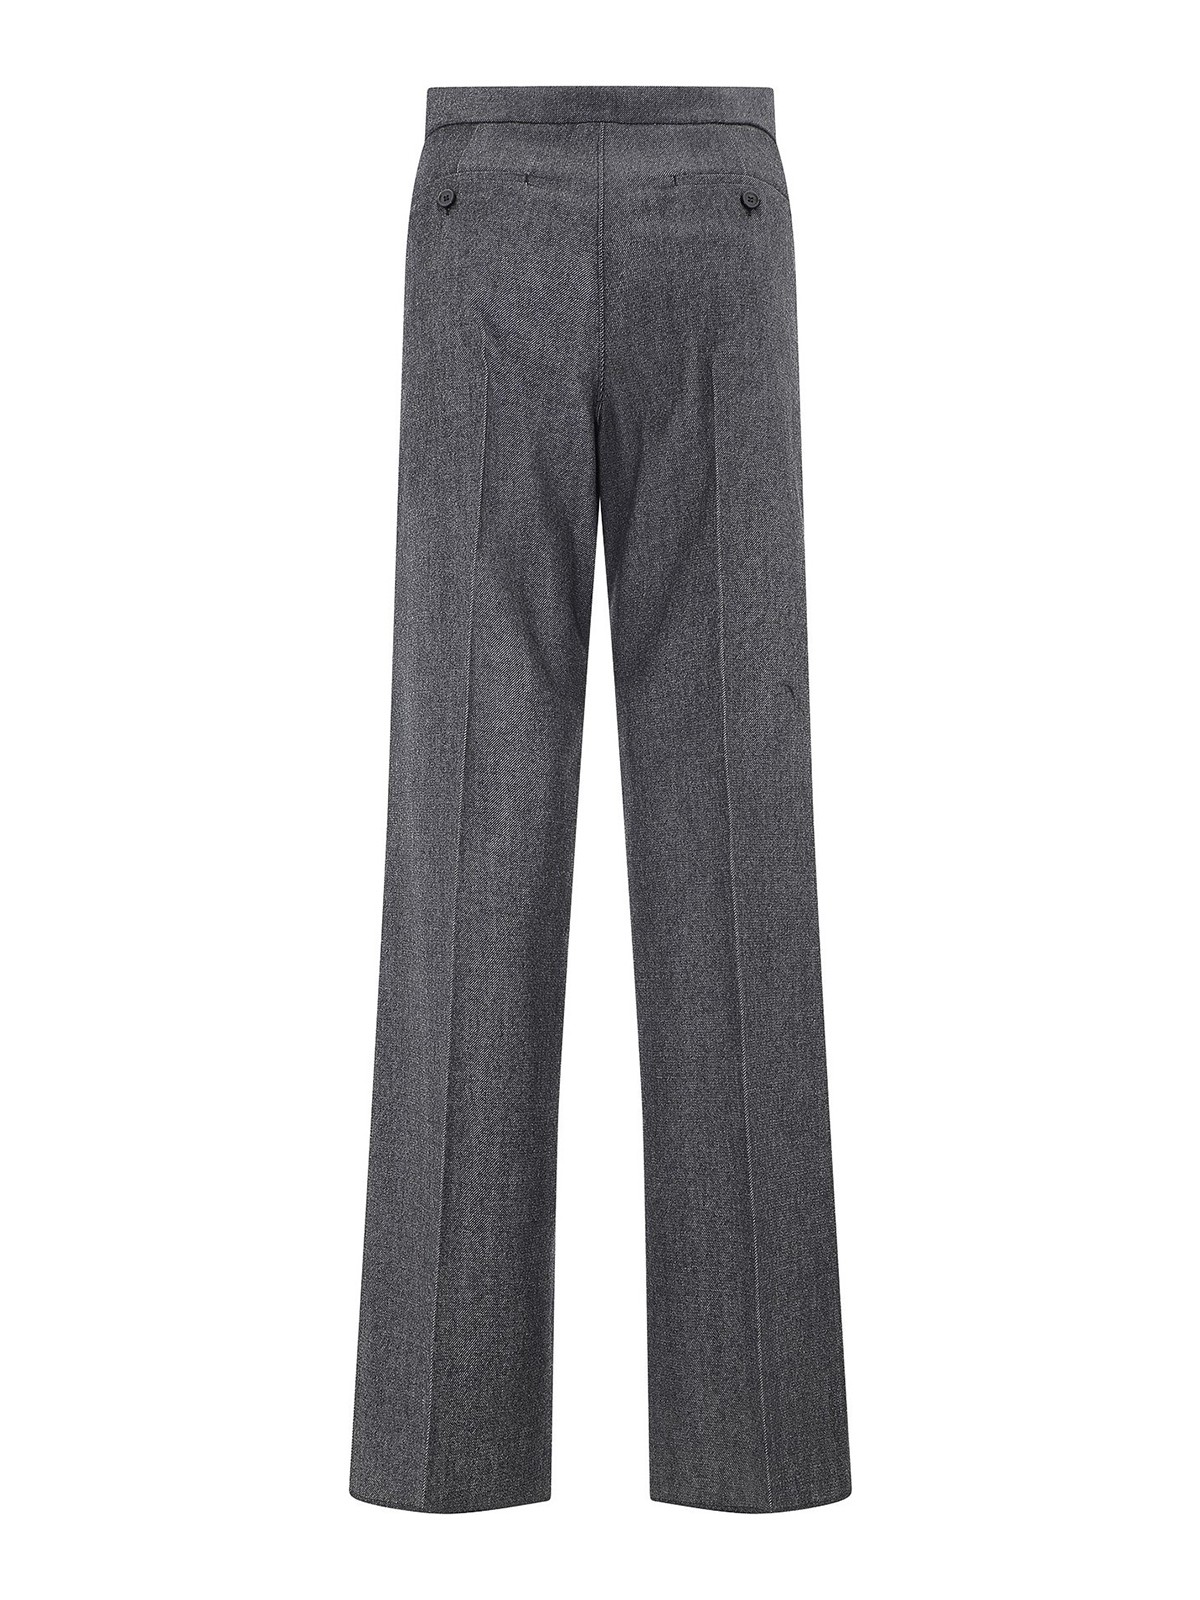 Shop Slim Fit Solid Formal Trousers with Pocket Detail and Belt Loops  Online | Max Bahrain